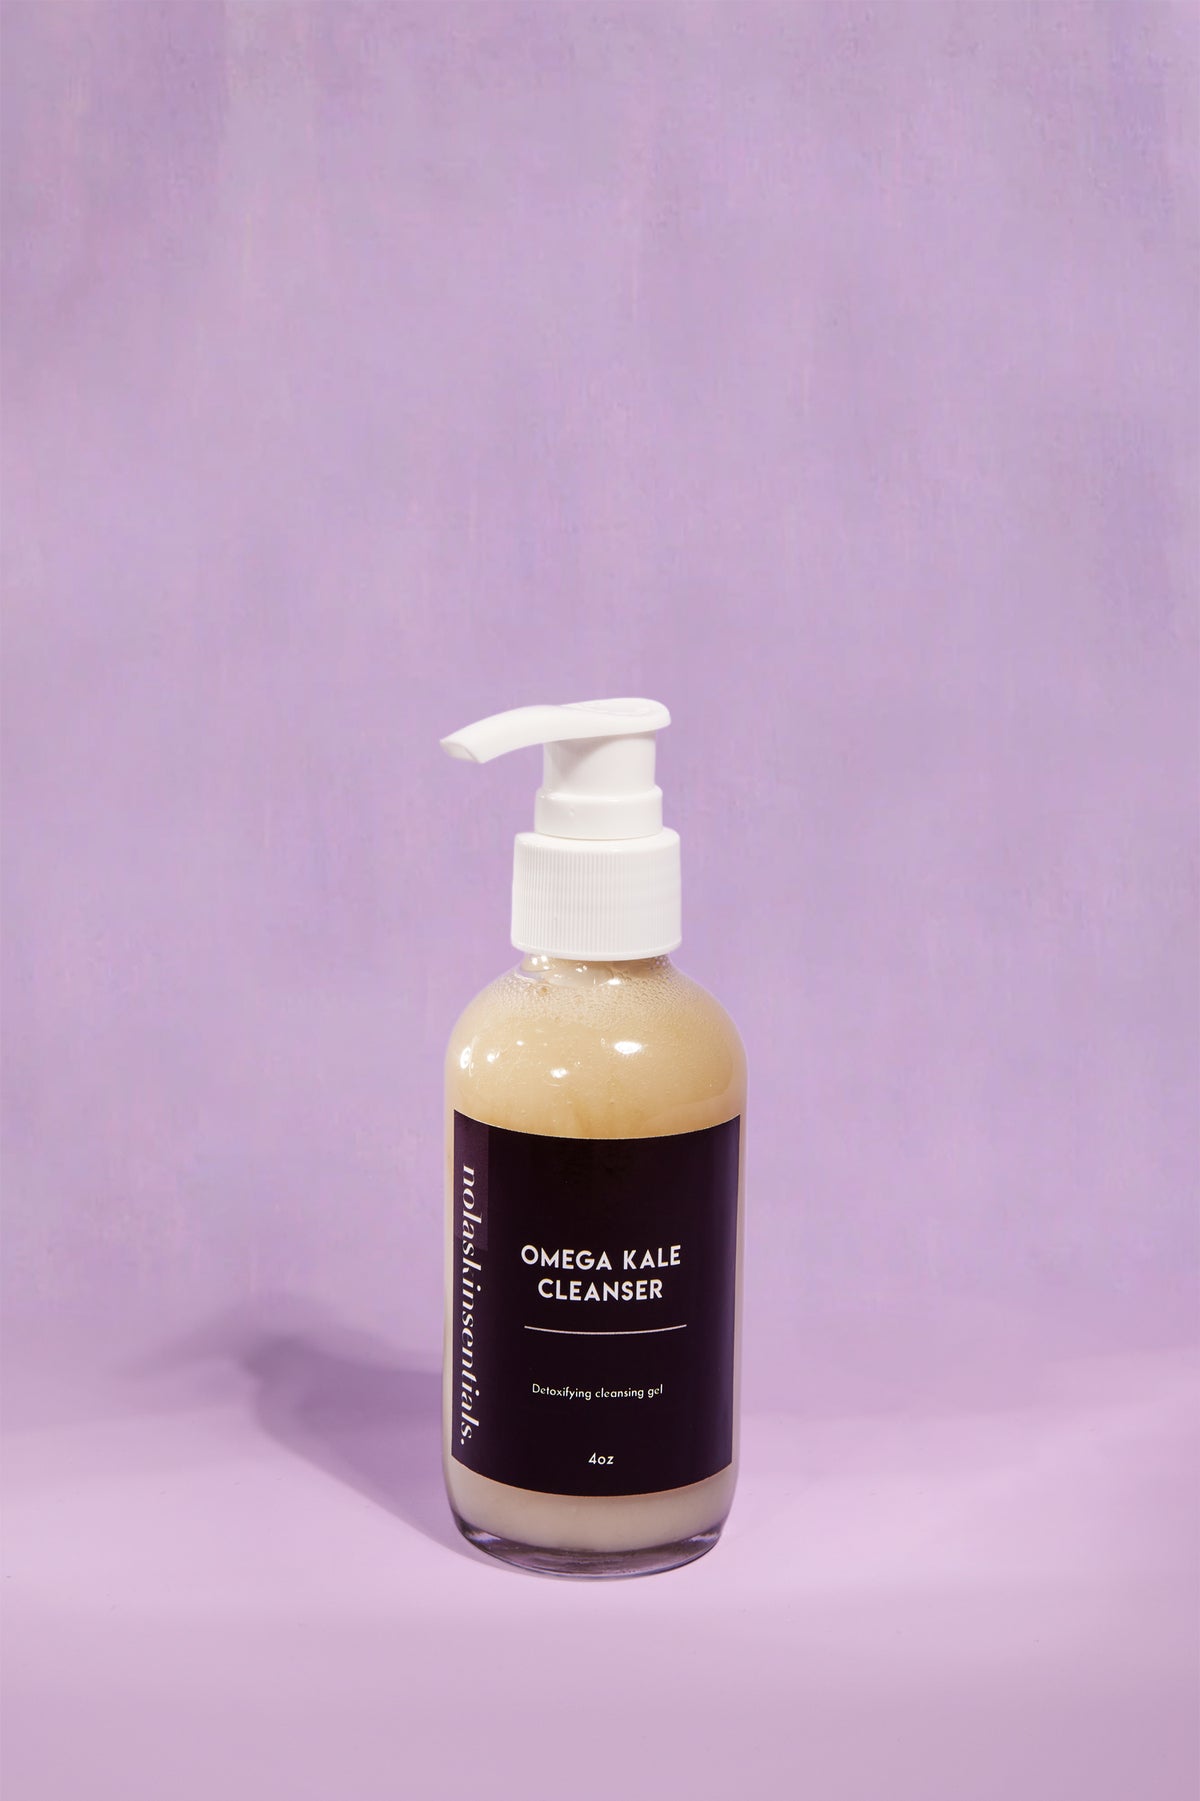 Nolaskinsentials The Real You Jelly Cleanser Duo - Cleanse & Nourish Skin